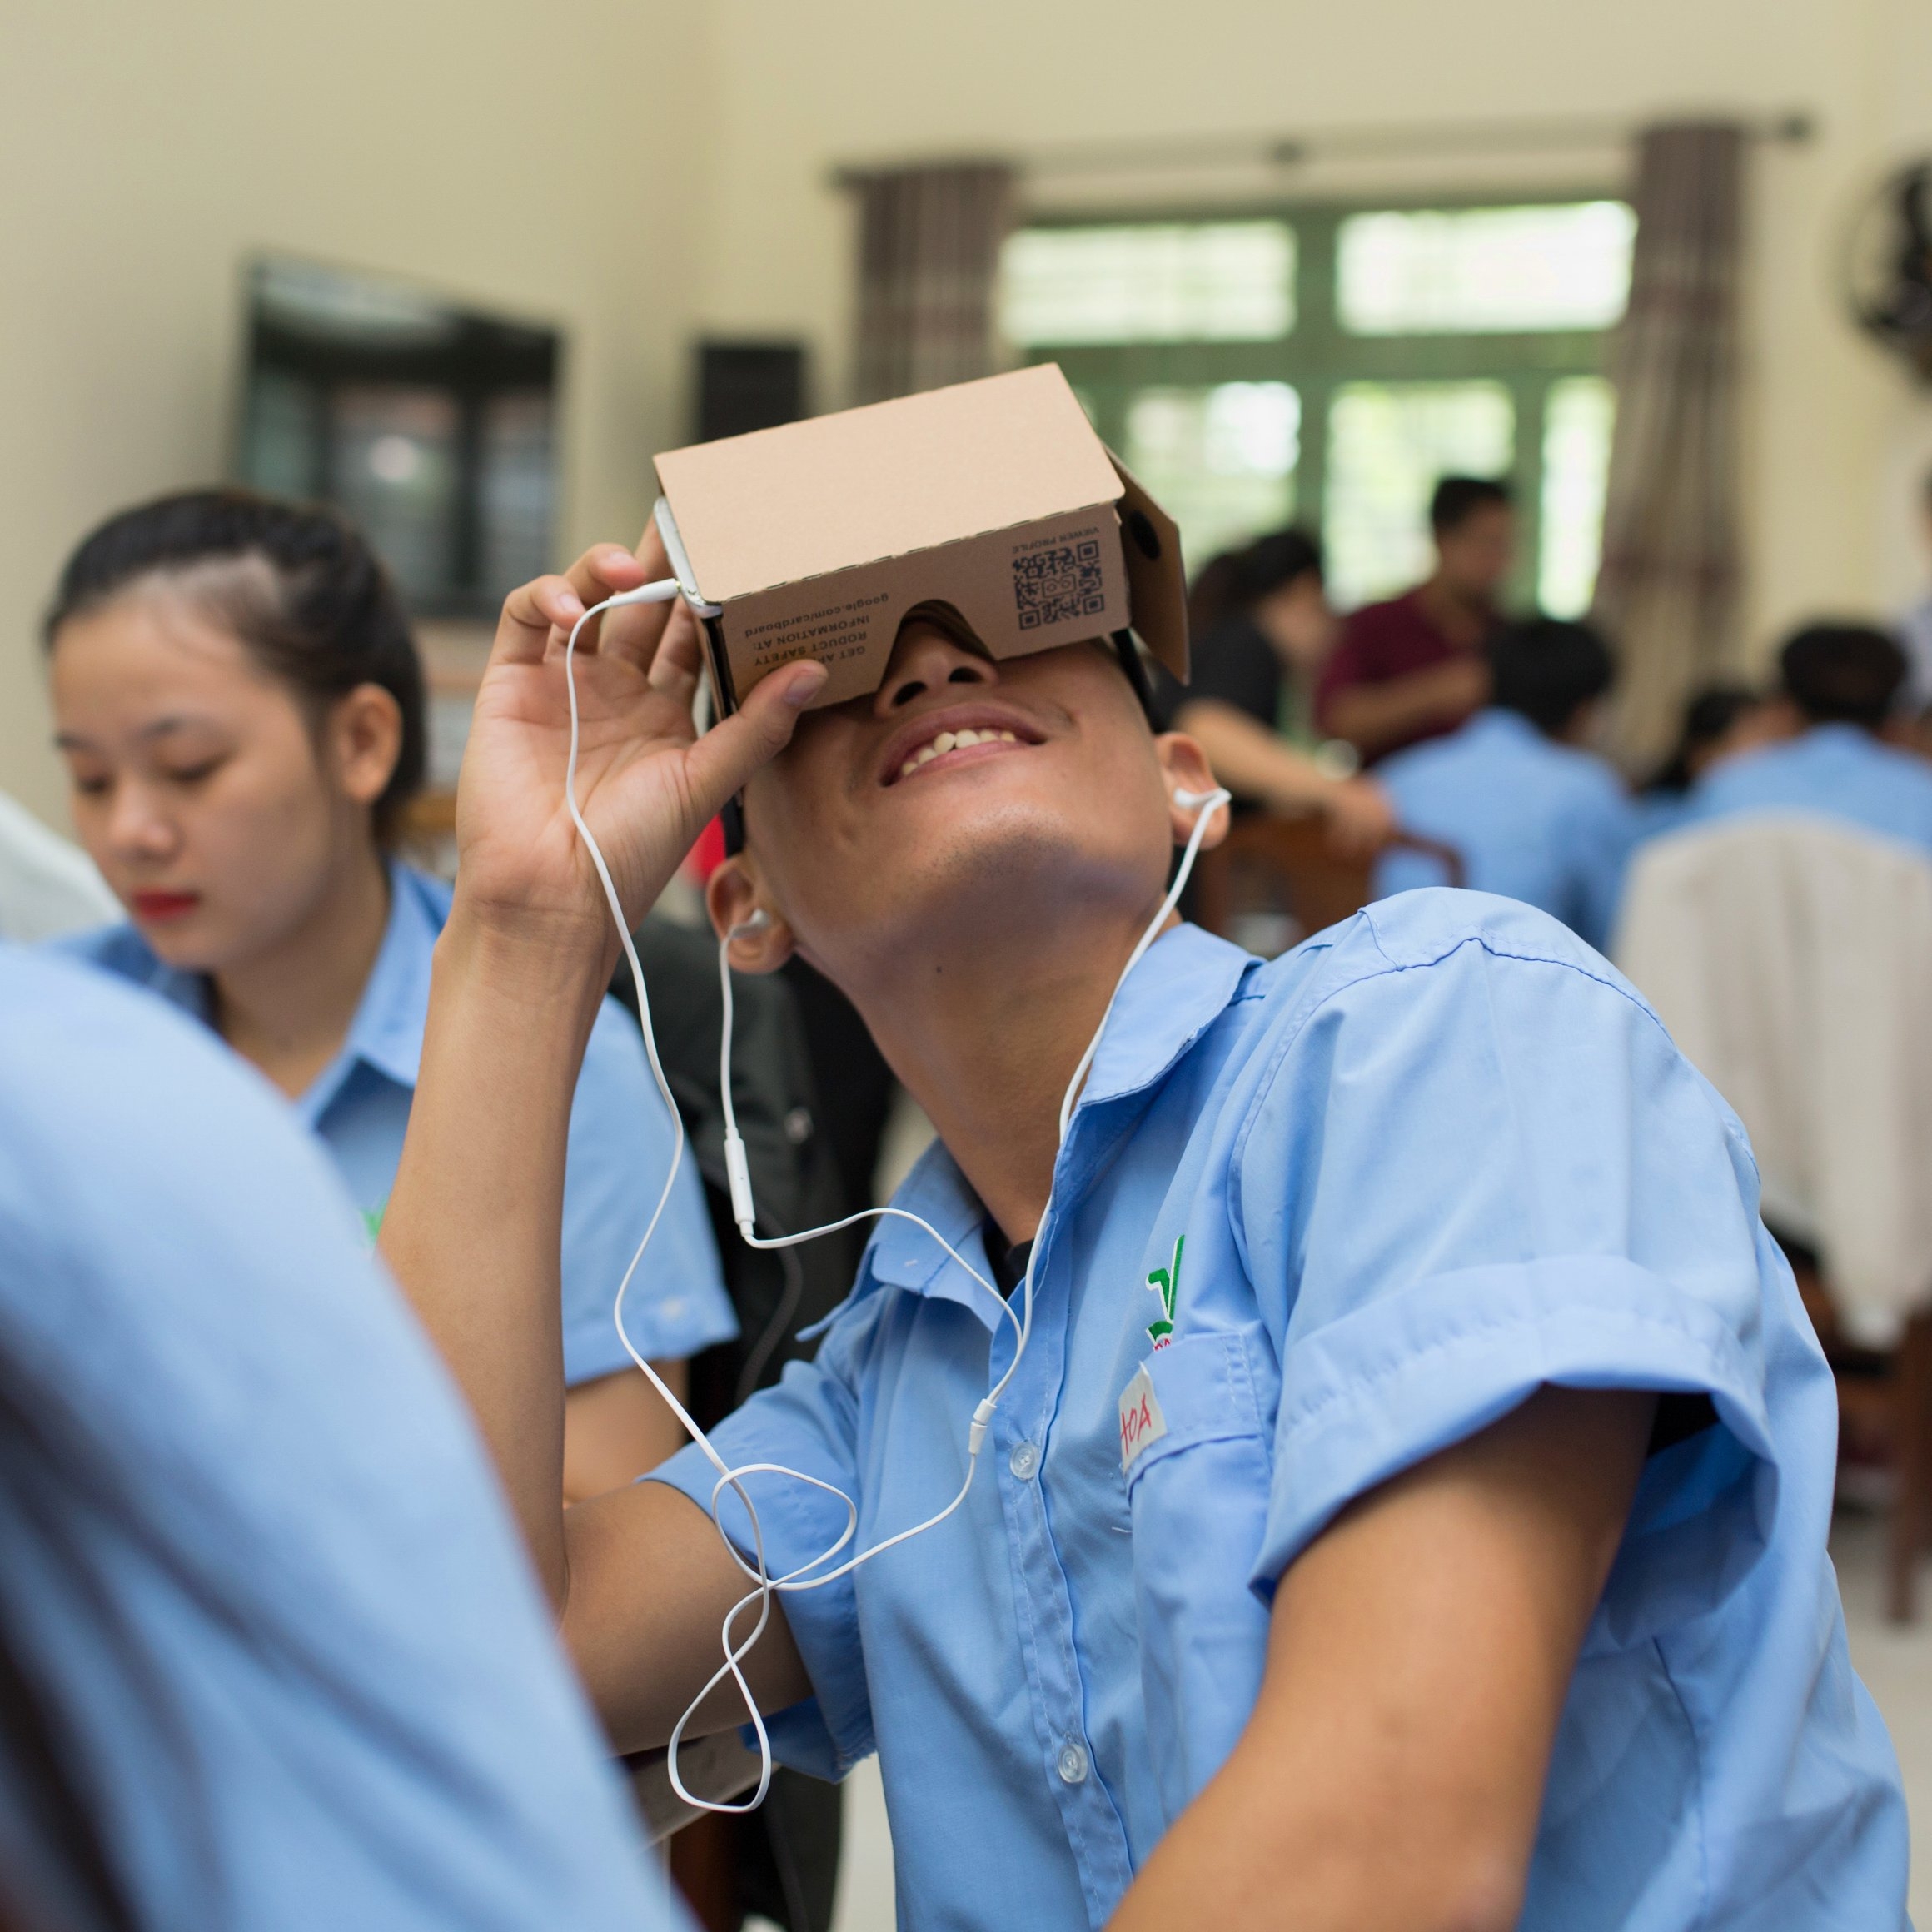 Children in Vietnam get a glimpse at technological innovation. Photo credit: Accenture/Save the Children 2018.